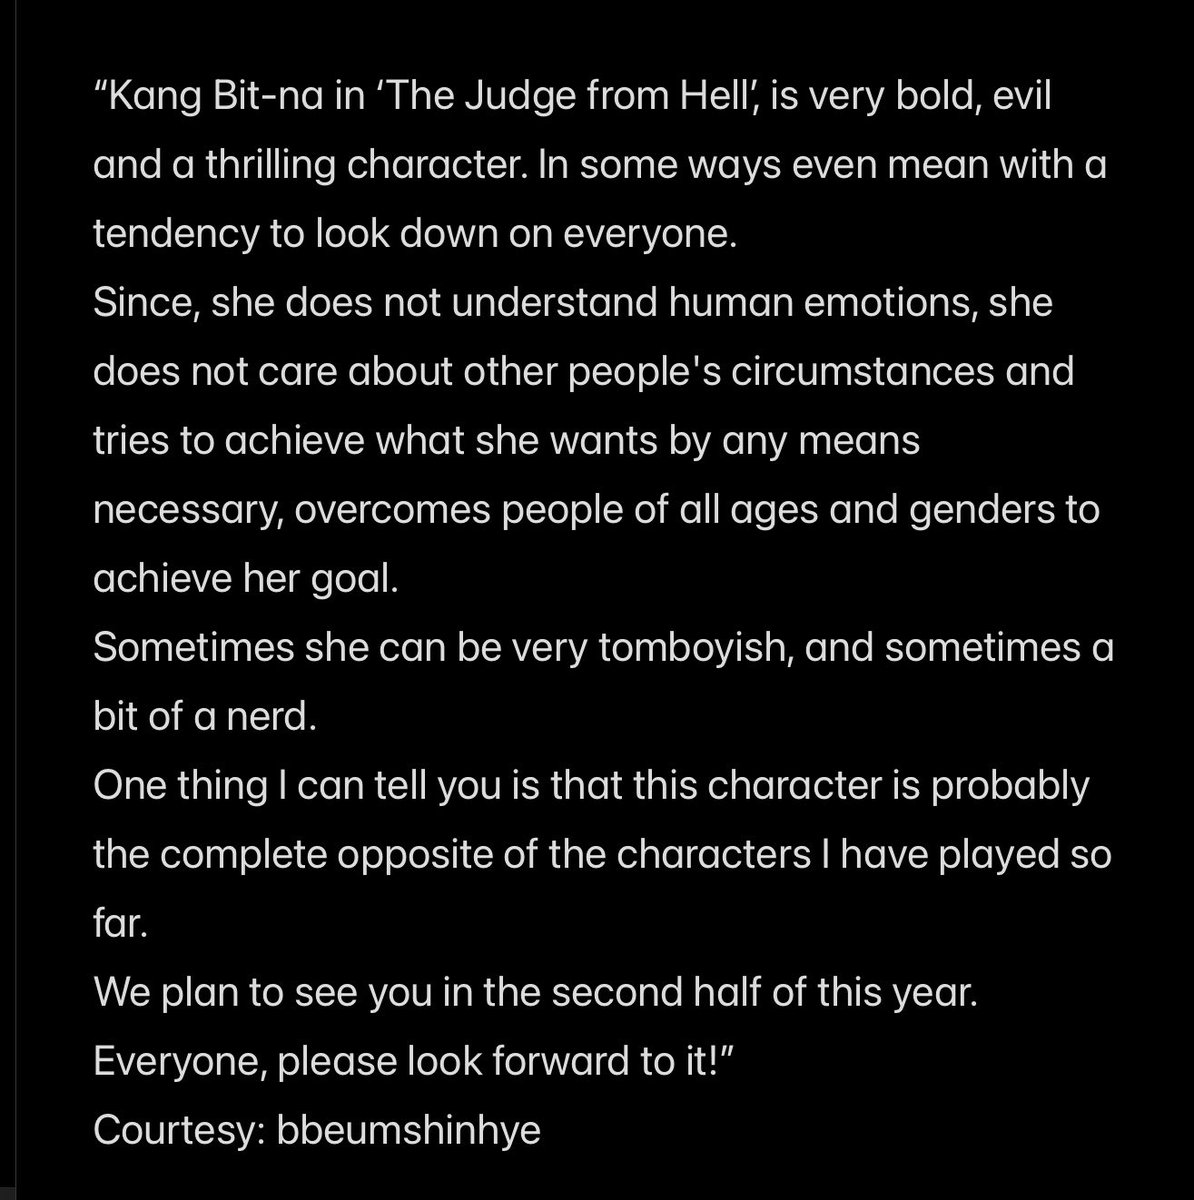 Shinhye on the character Kangaroo Bit-Na from
#TheJudgeFromHell 6th Sep, 2024
Pic ctto 
#MemoryofAngelinTaipei FM
#ParkShinHye #박신혜 #朴信惠 #パク・シネ #พัคชินฮเย